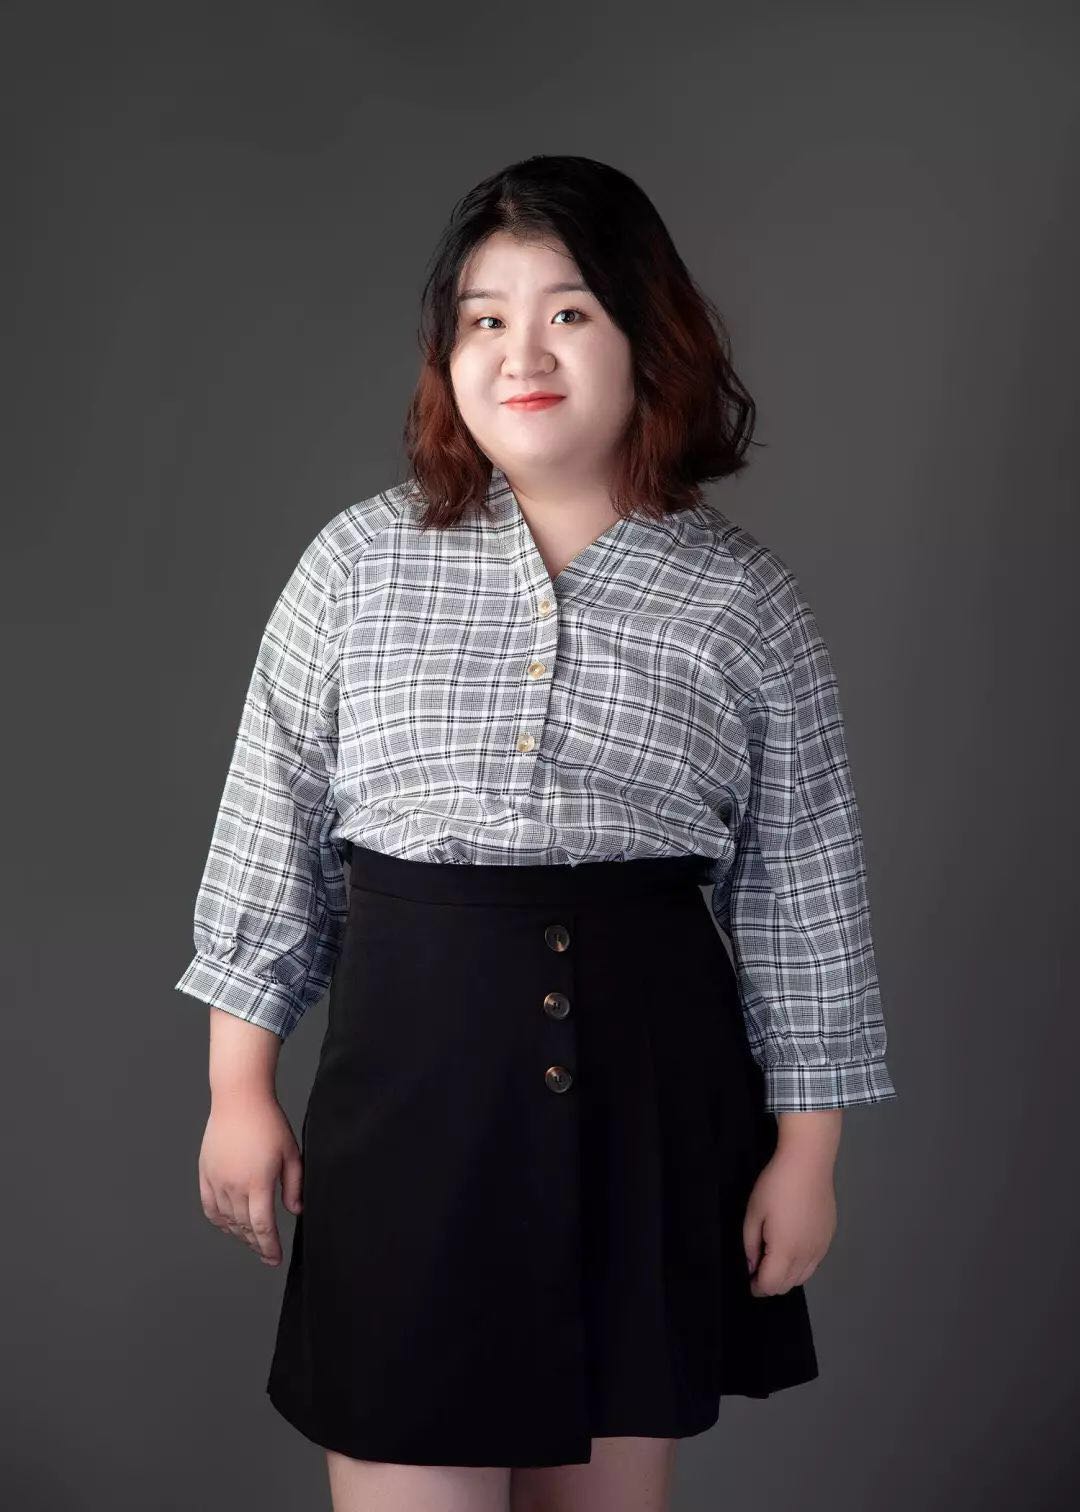 In super-skinny Japan, Naomi Watanabe is chubby and proud - The ...